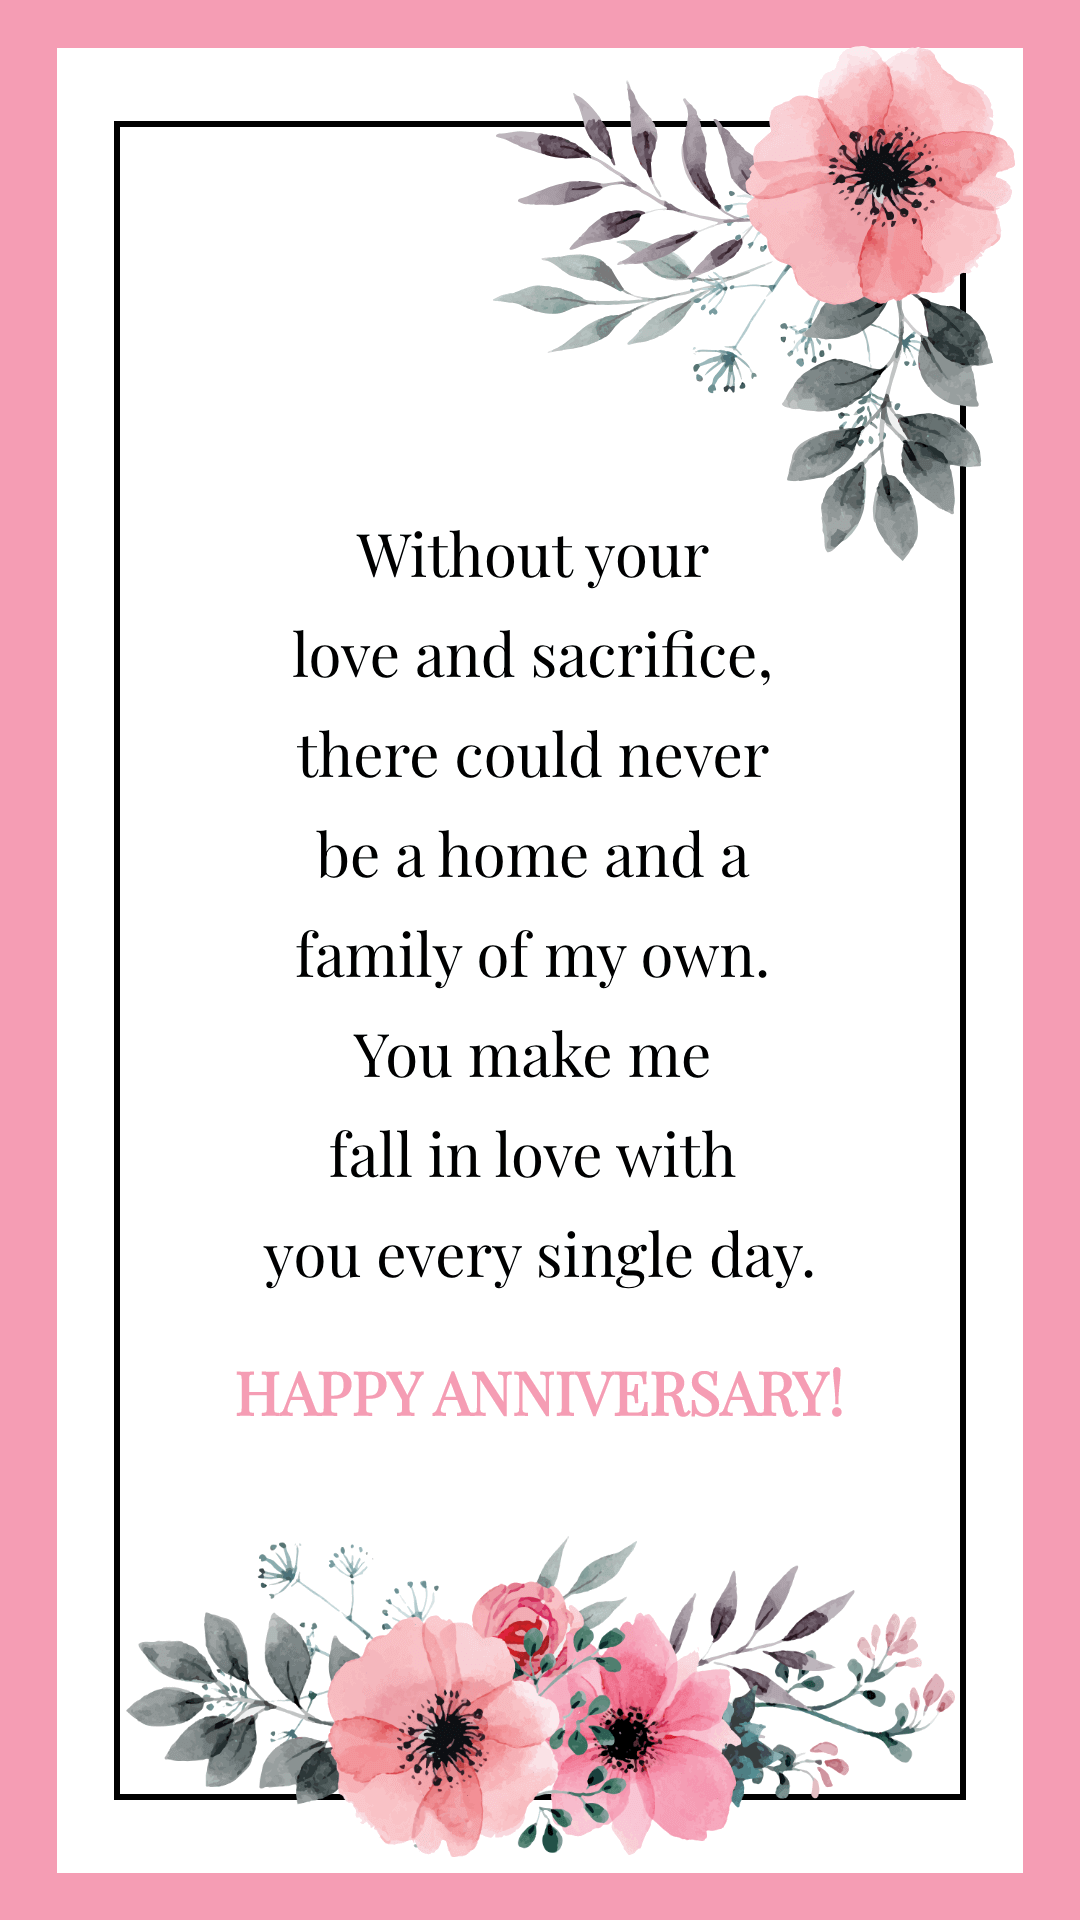 Wedding Anniversary Wishes Images, Pictures for Couple